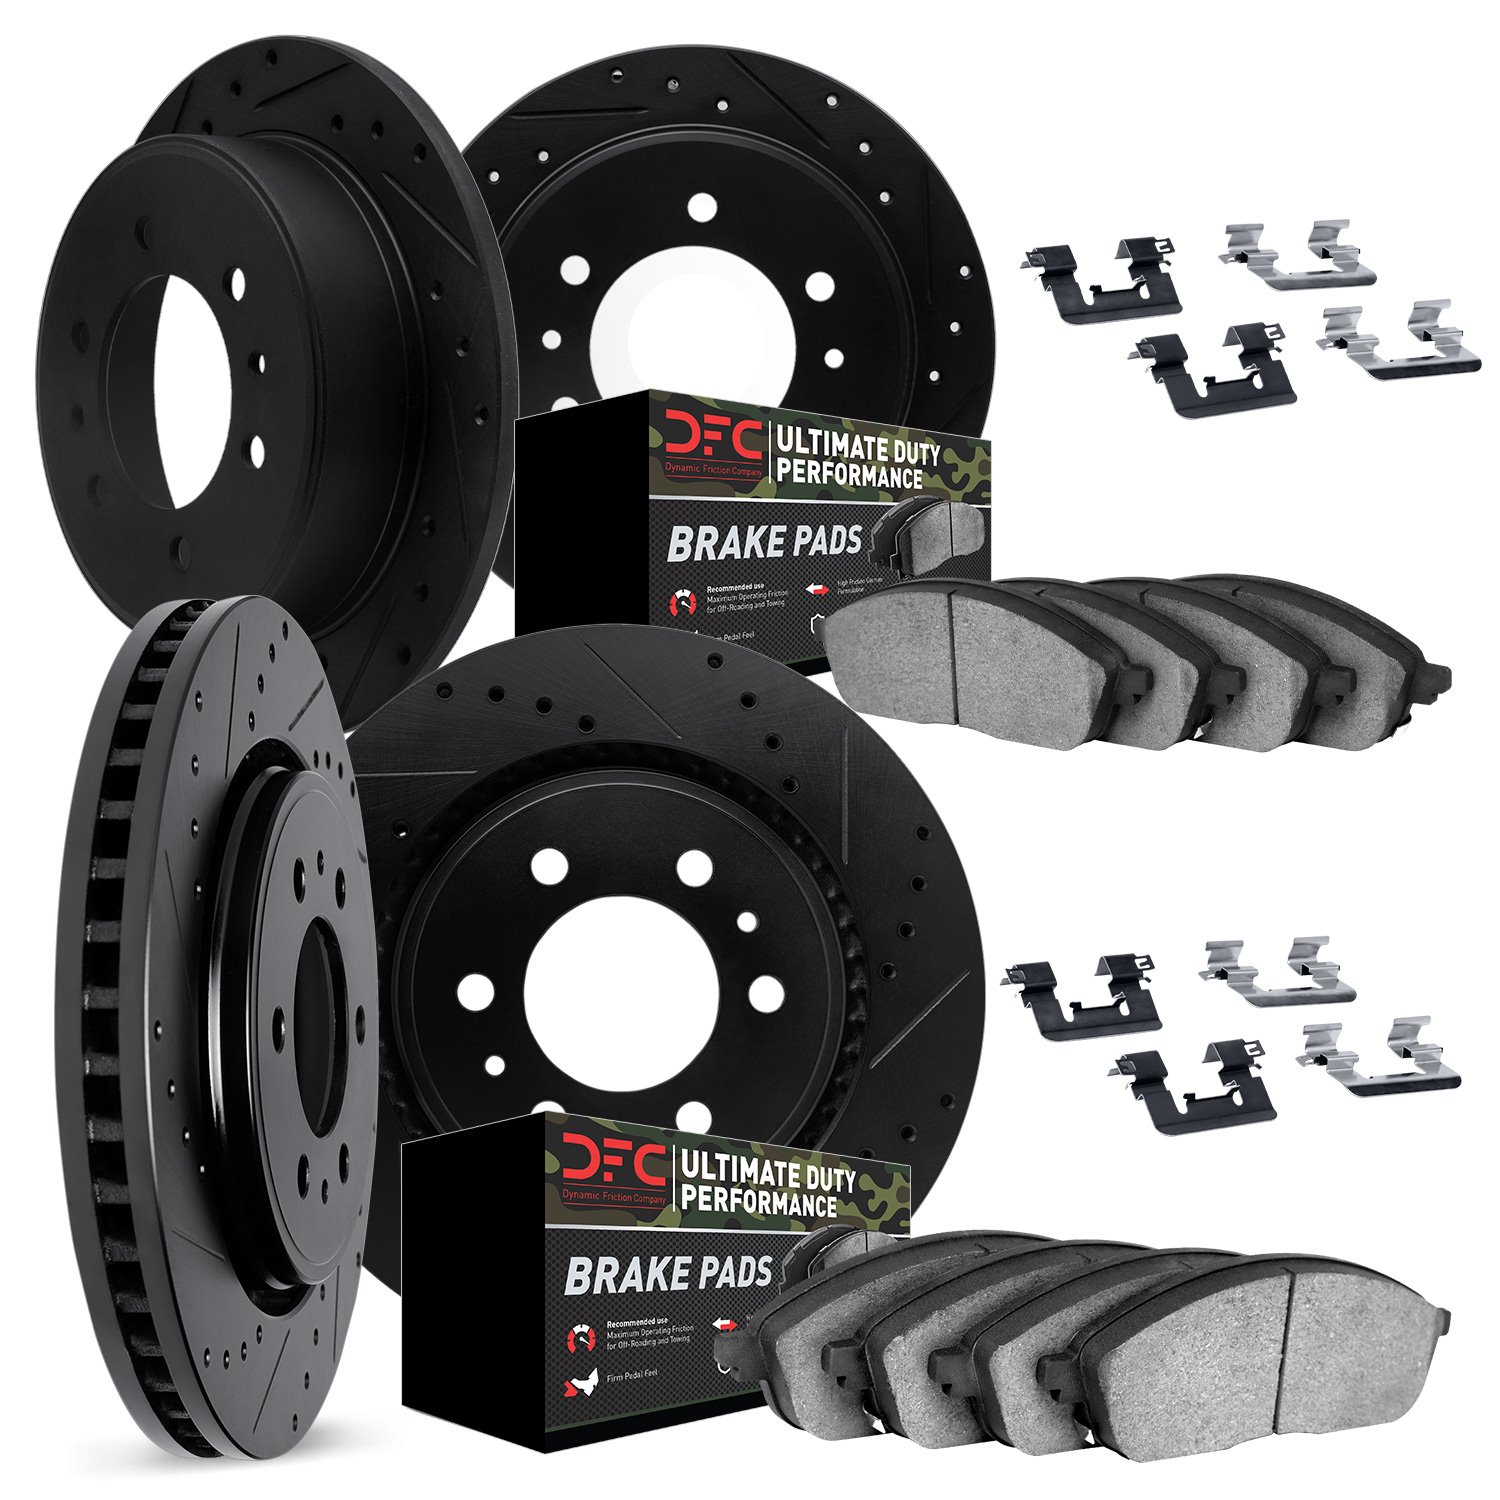 8414-67002 Drilled/Slotted Brake Rotors with Ultimate-Duty Brake Pads Kit & Hardware [Black], 2005-2007 Infiniti/Nissan, Positio